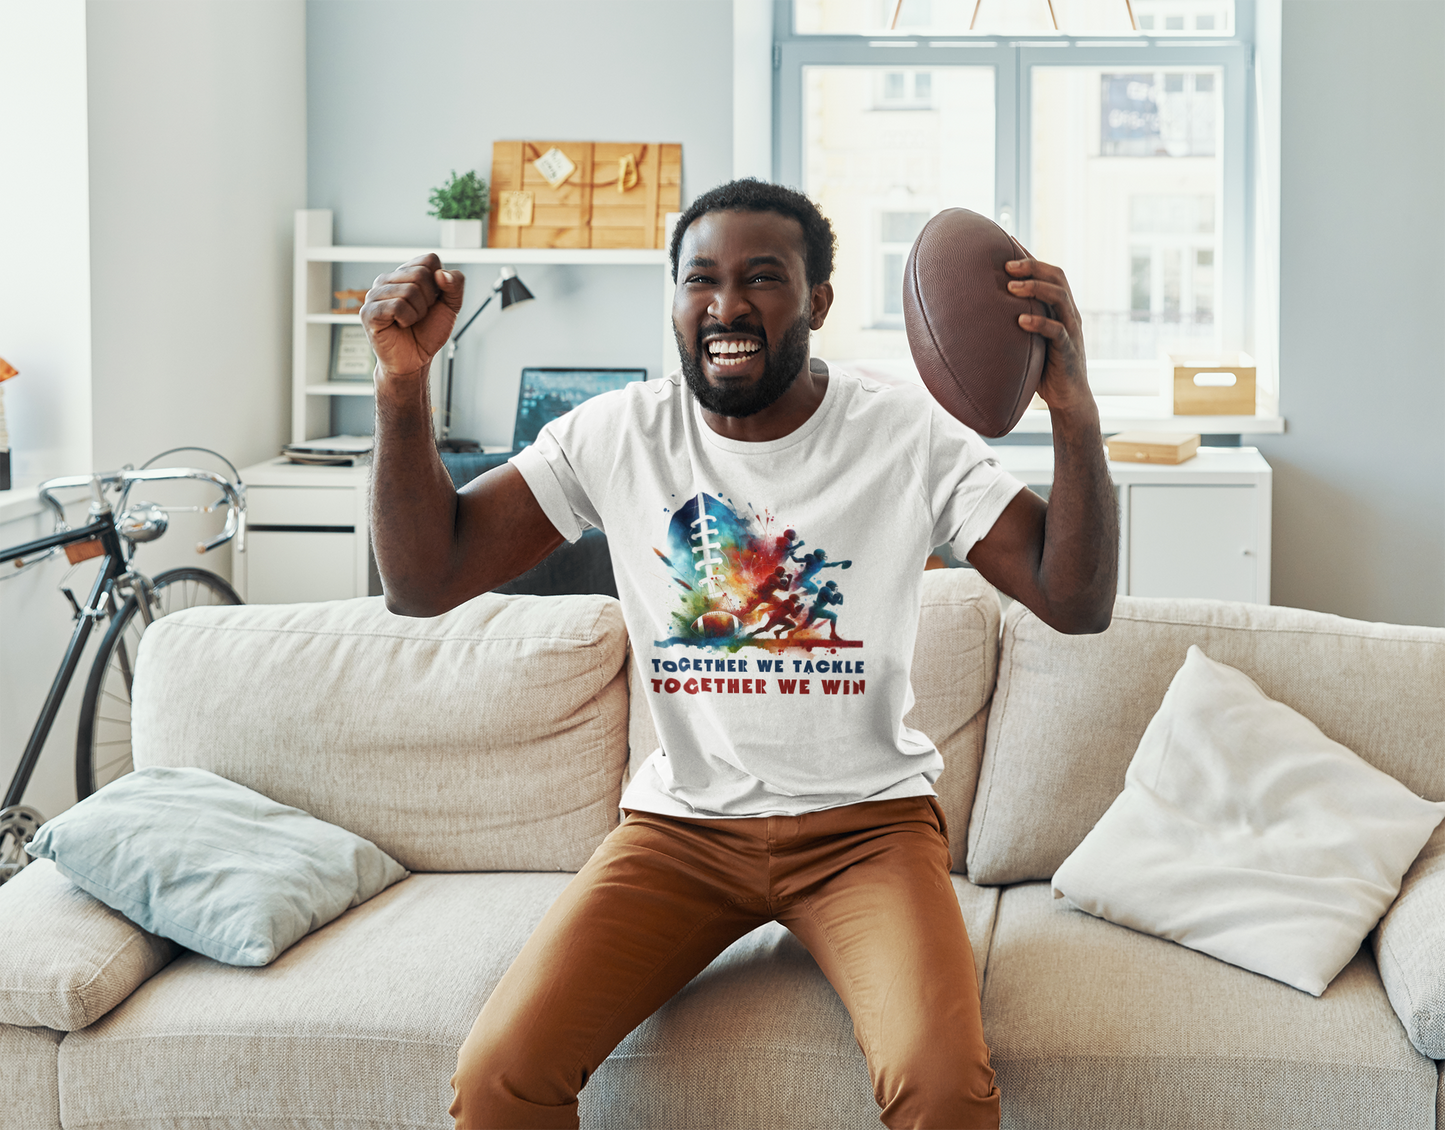 American Football Team Shirt Gift for Football Lovers, Football Player T-Shirt for Coach